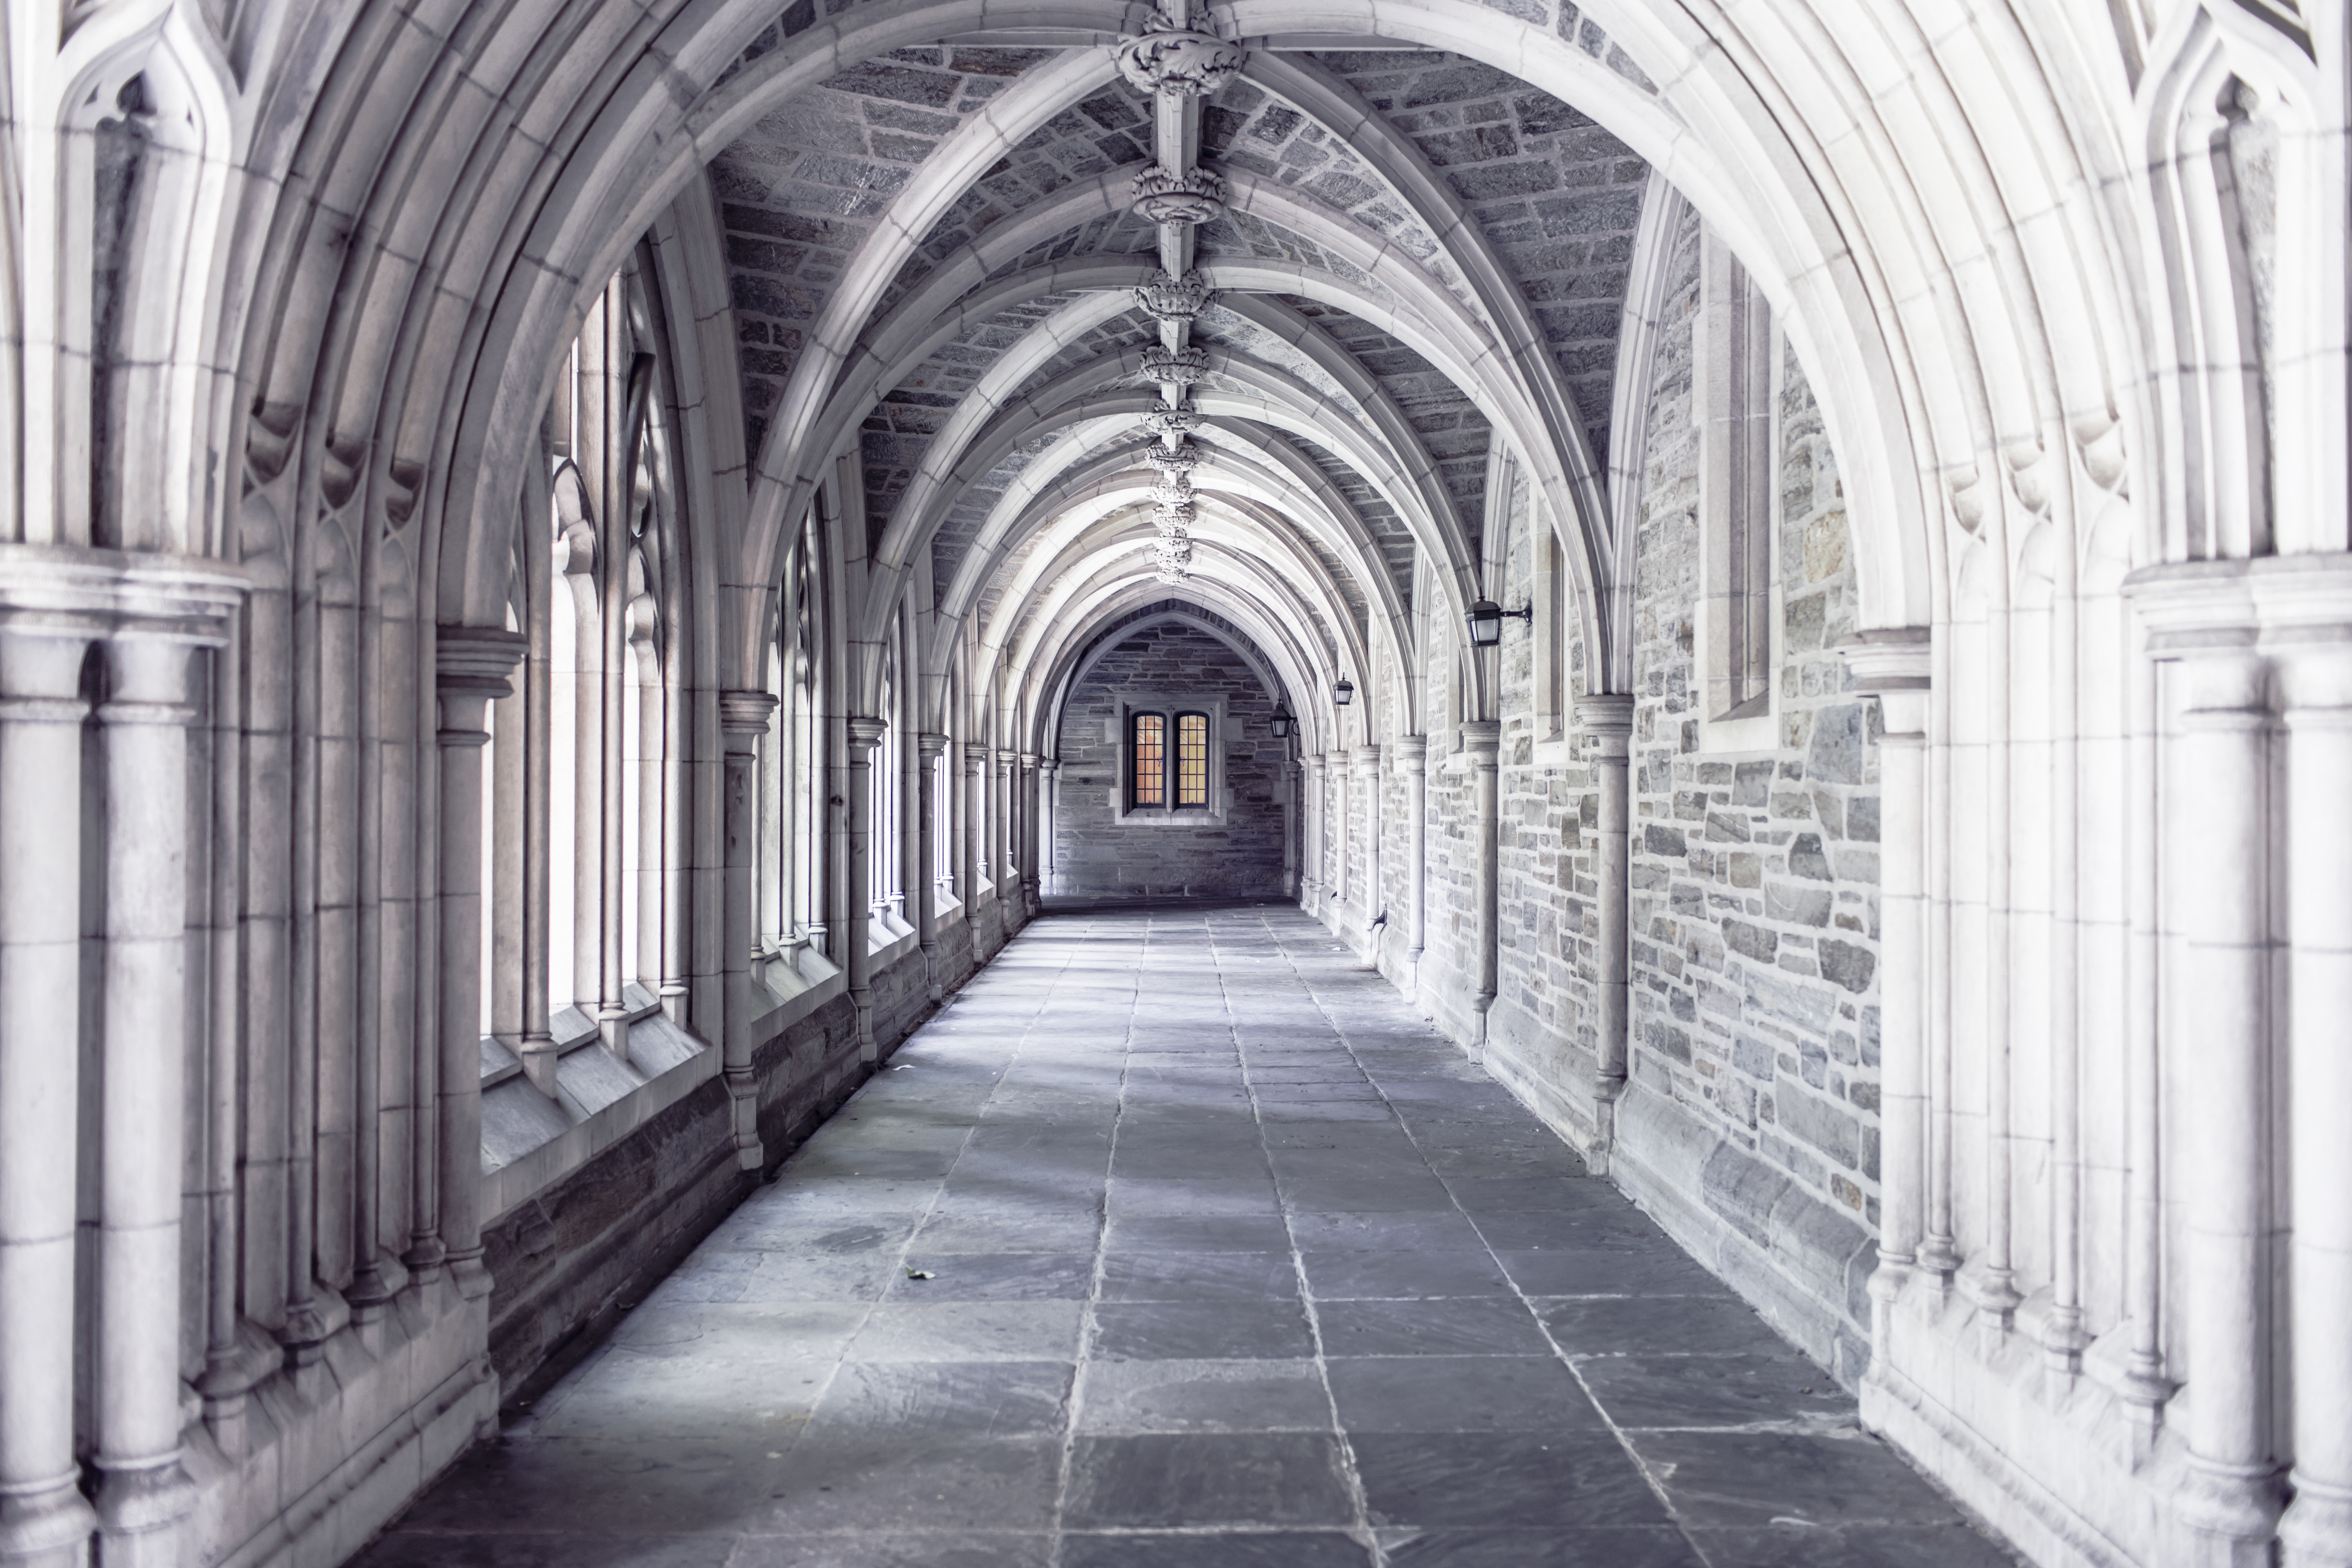 A photograph of a church hallway with arches.